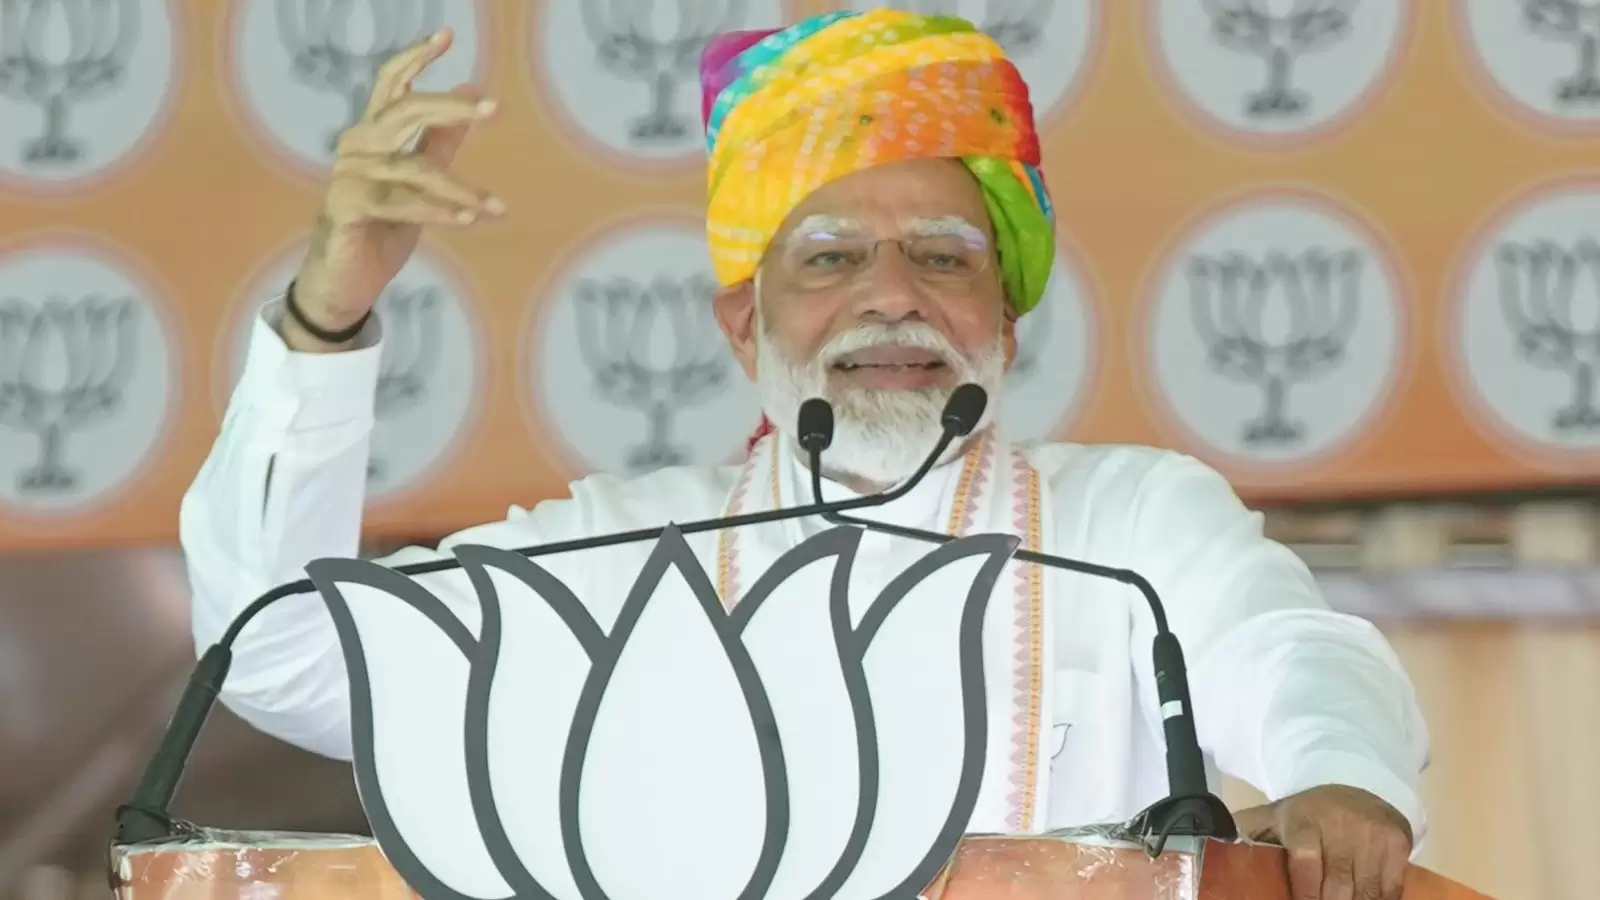 Modi Draws from Manmohan Singh's Words to Criticize Congress; Party Hits Back